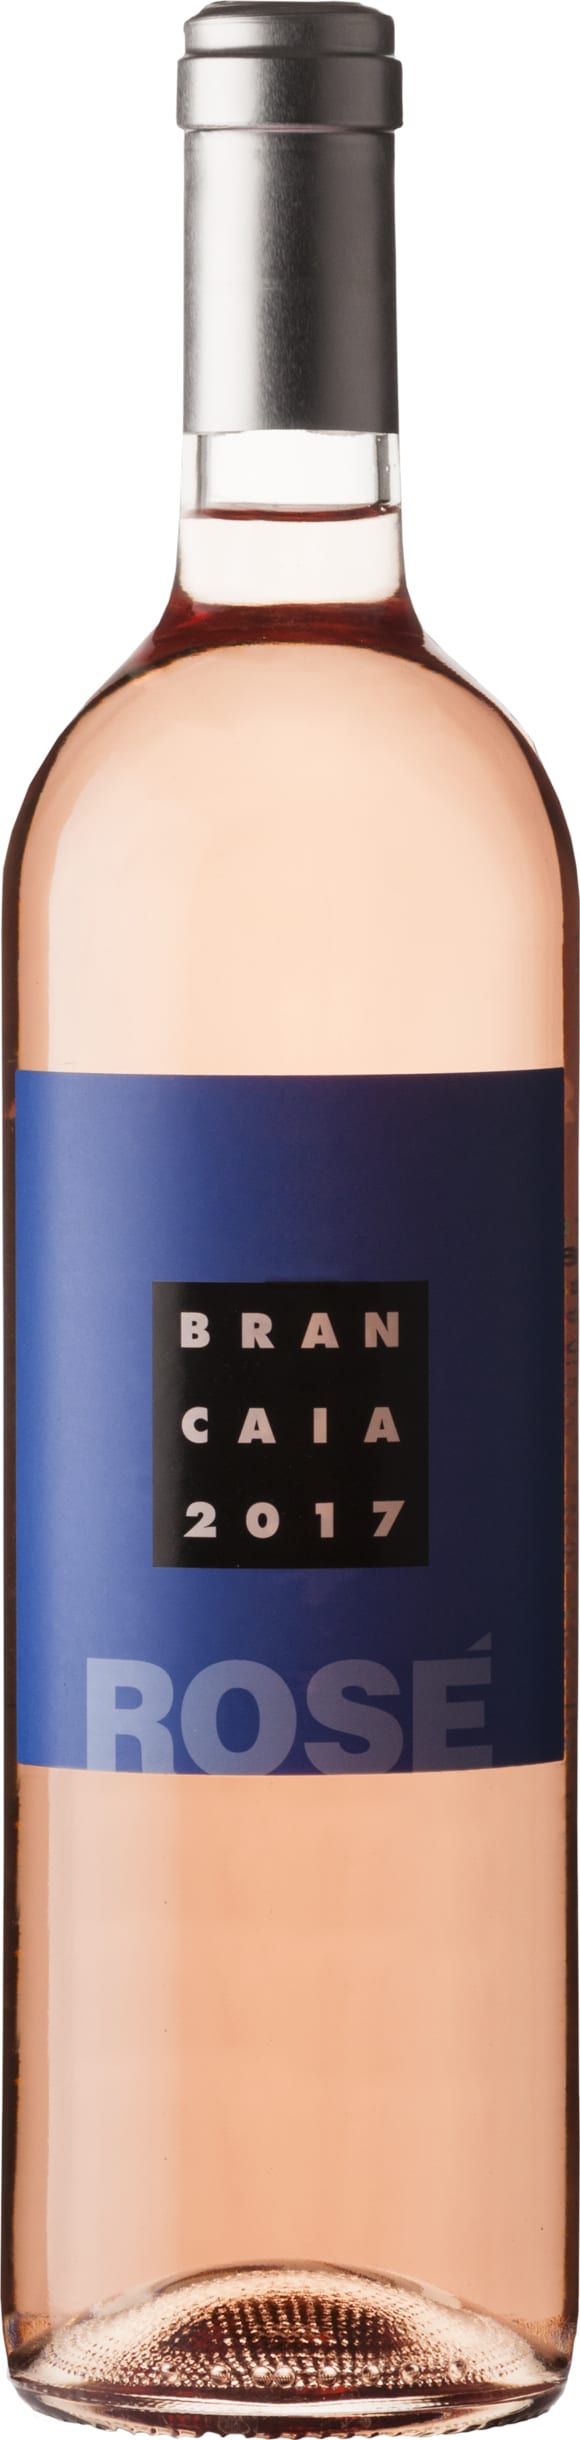 Casa Brancaia Rose 2022 75cl - Buy Casa Brancaia Wines from GREAT WINES DIRECT wine shop